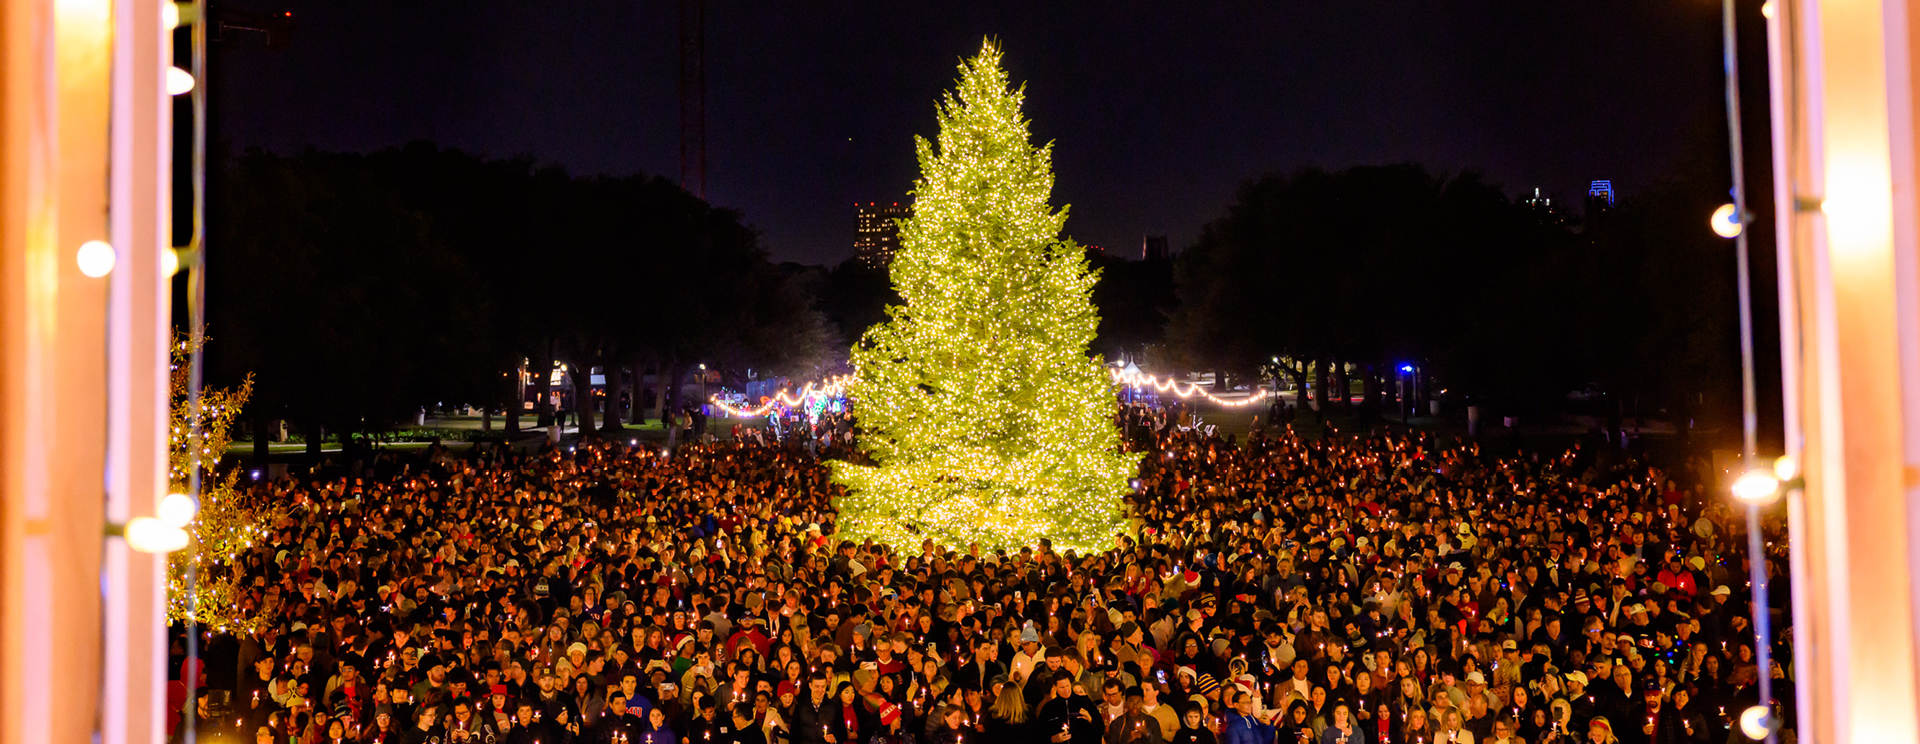 The Christmas tree lit up with a crowd surrounding it at the Celebration of lights